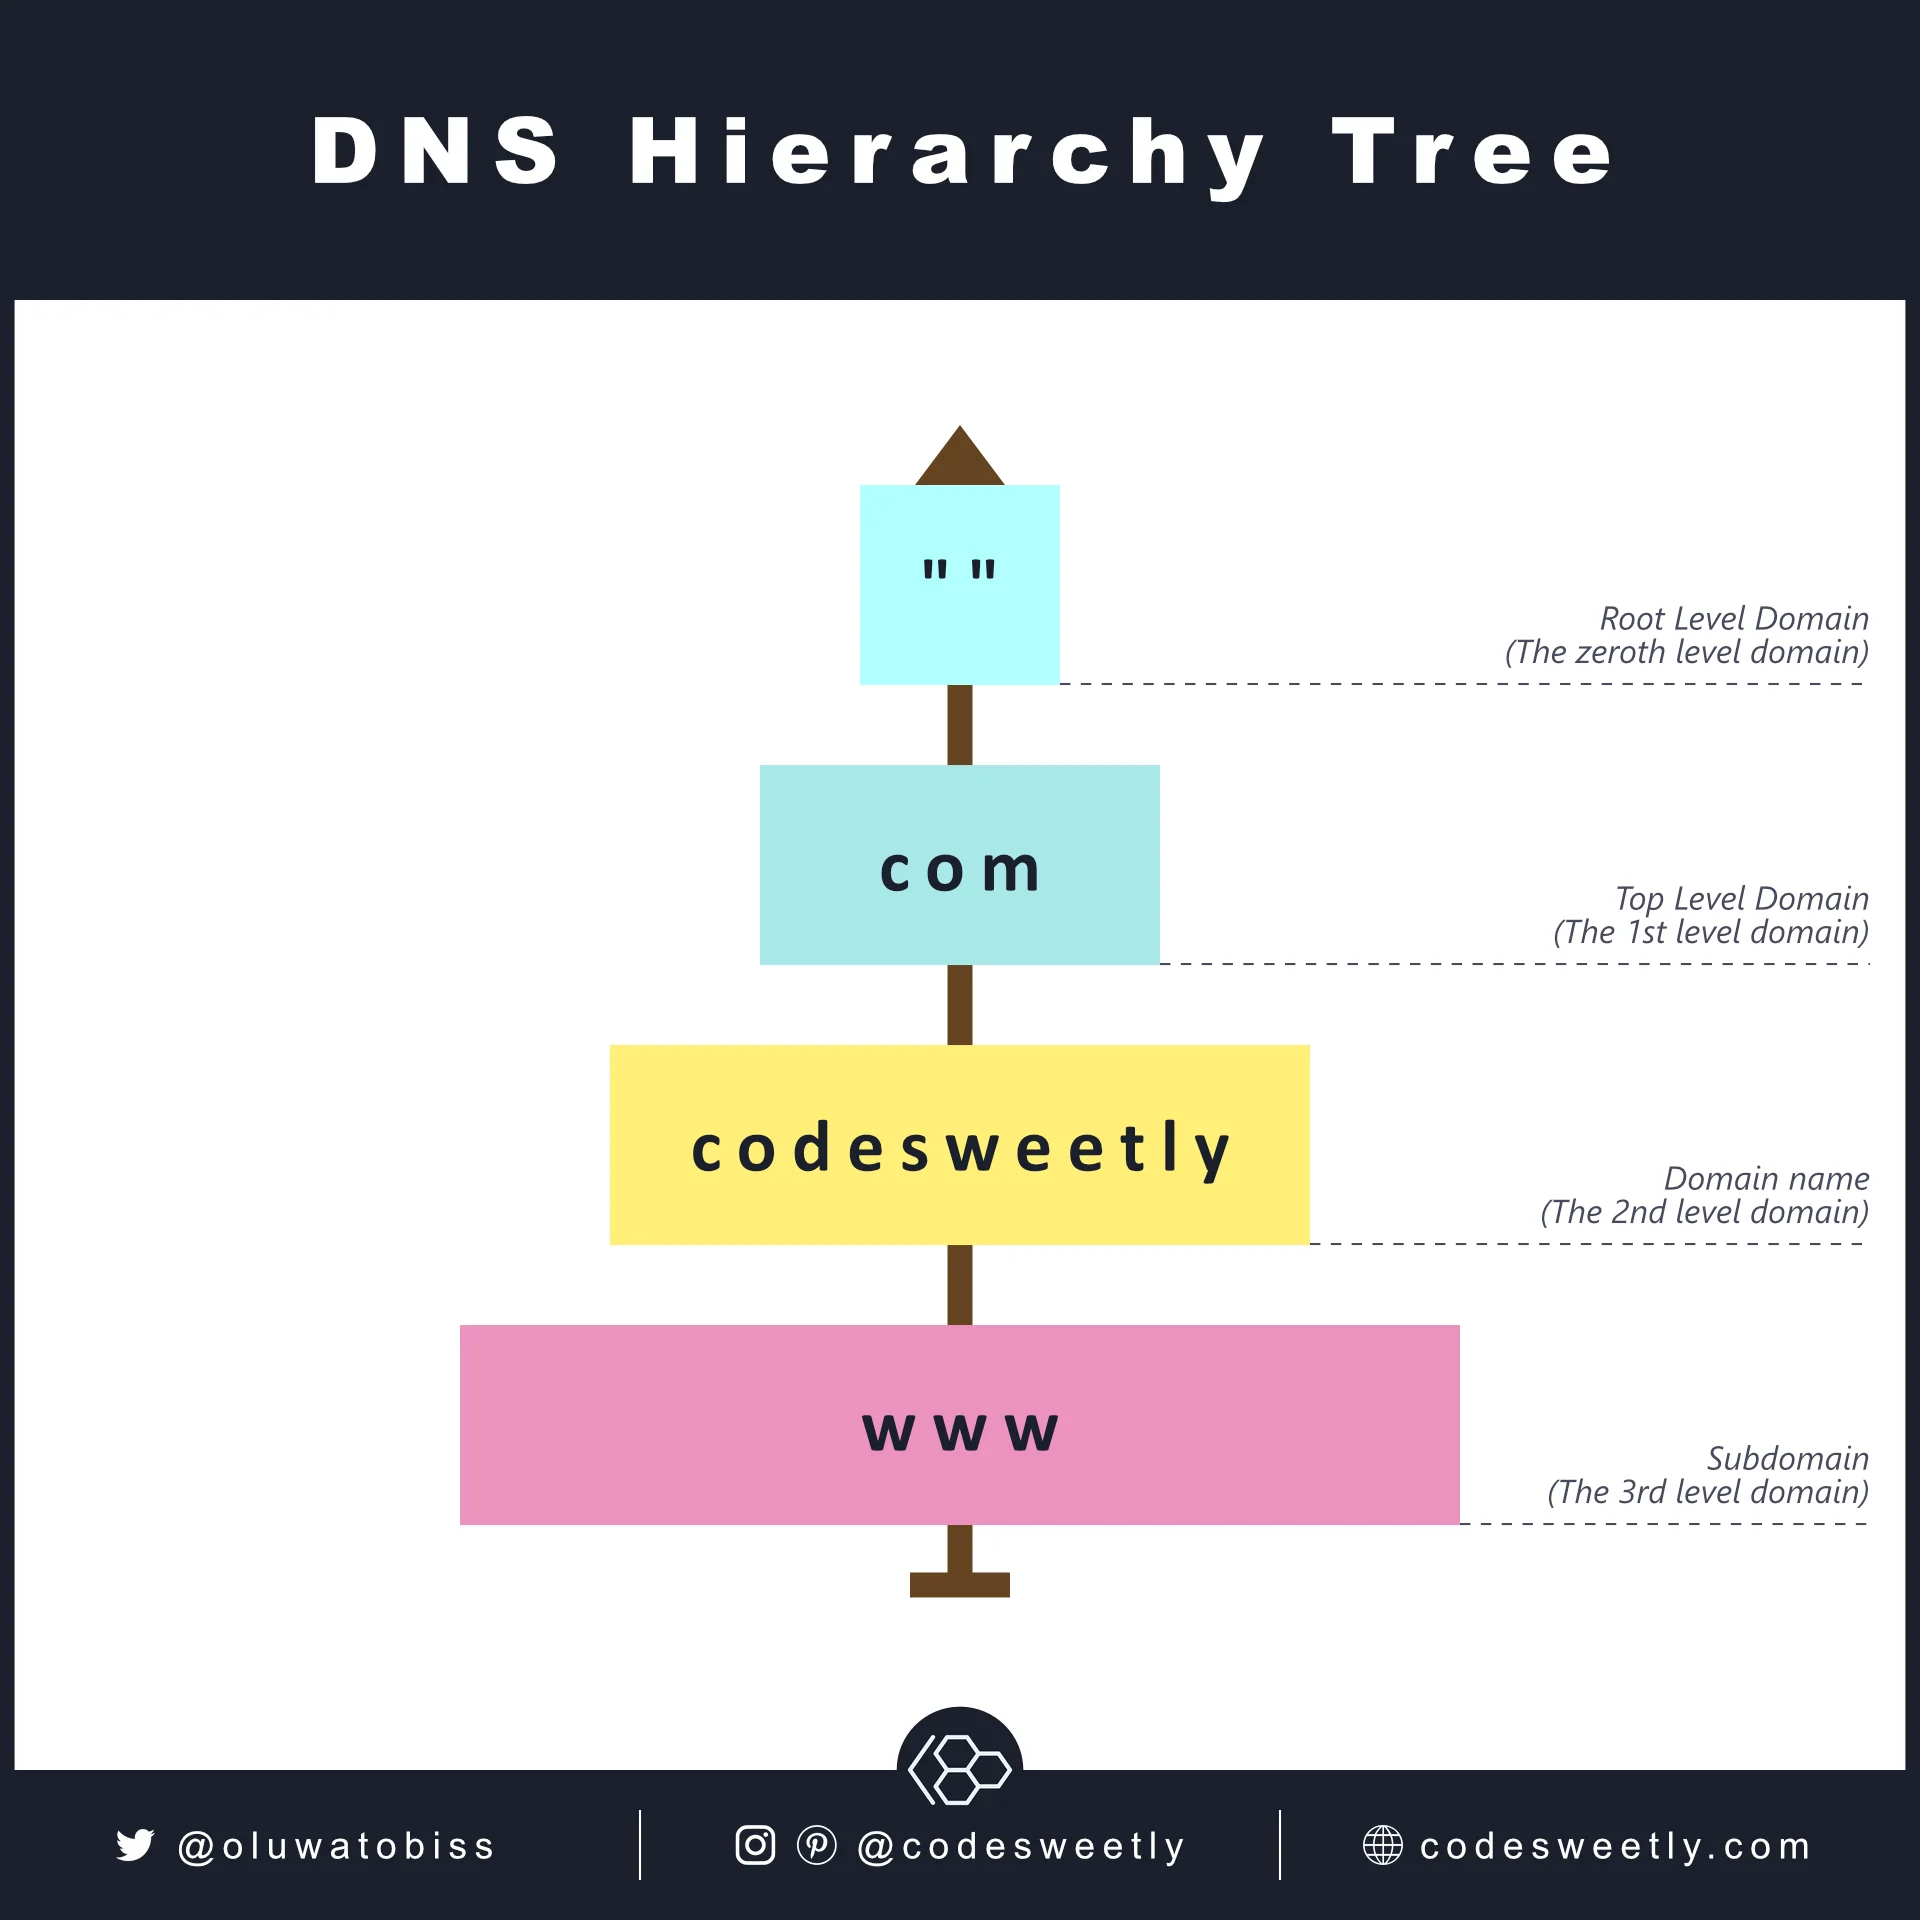 Illustration of the DNS hierarchy tree